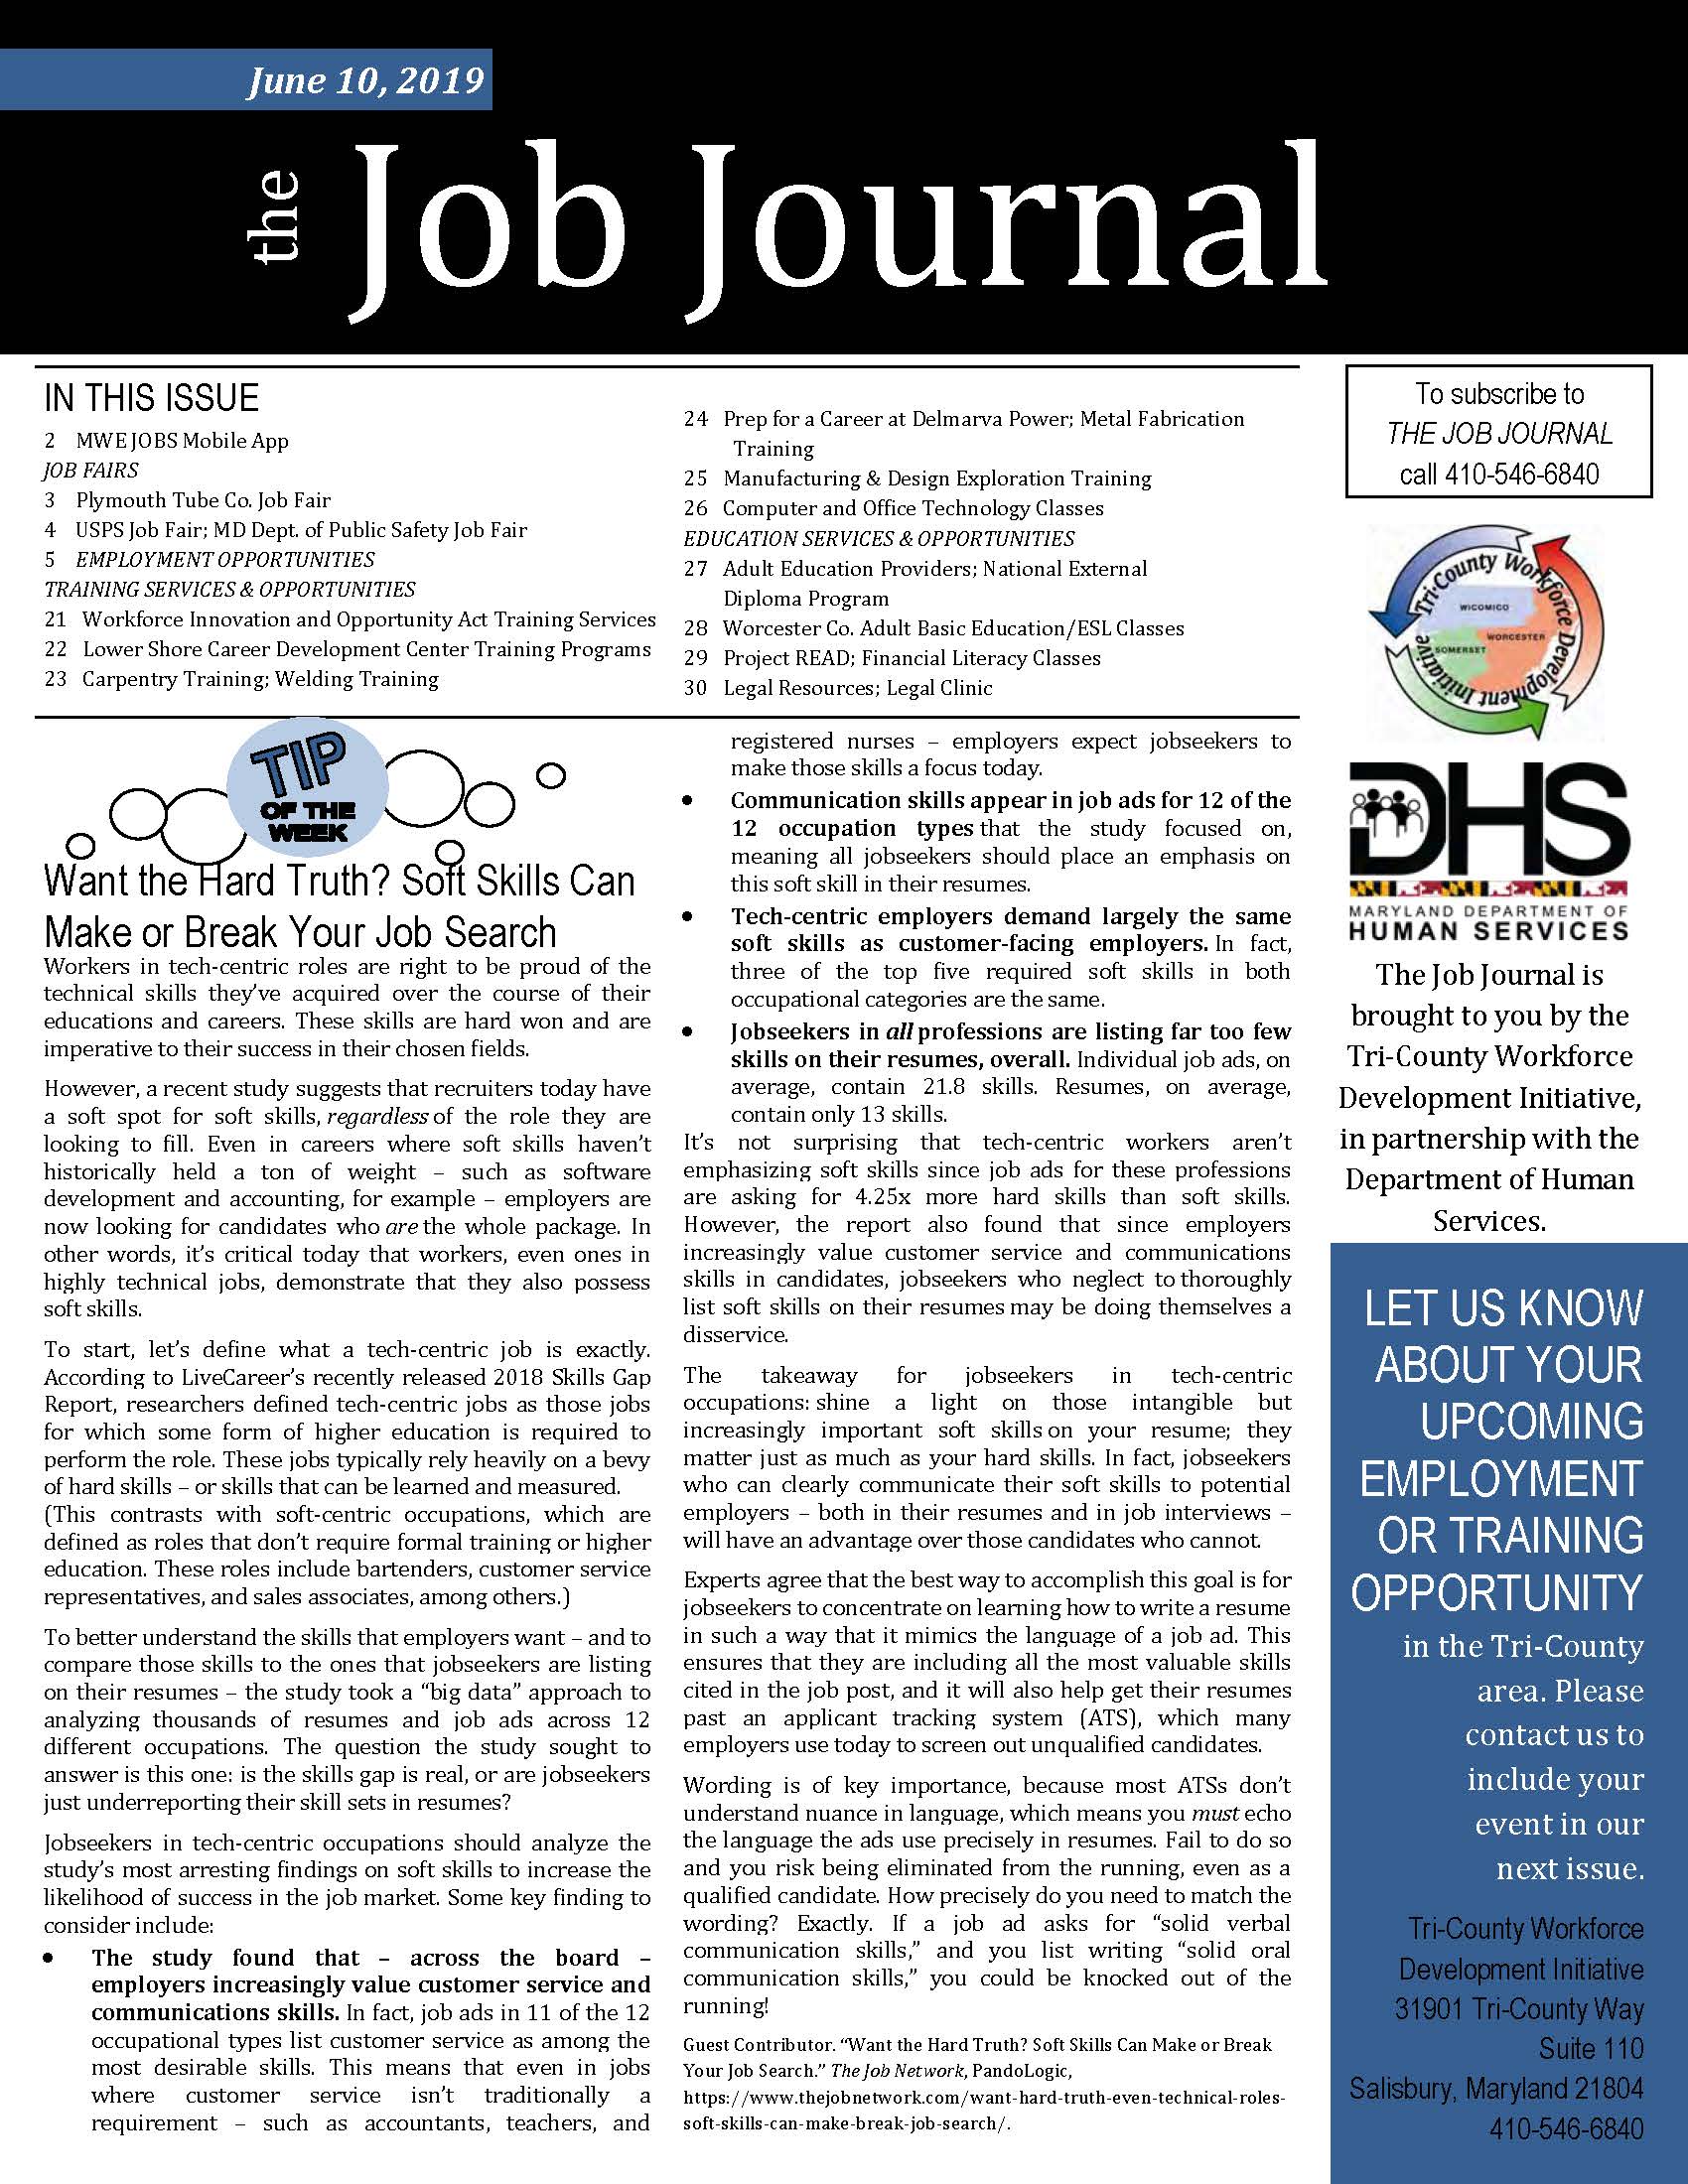 Front cover of The Job Journal 06.10.2019